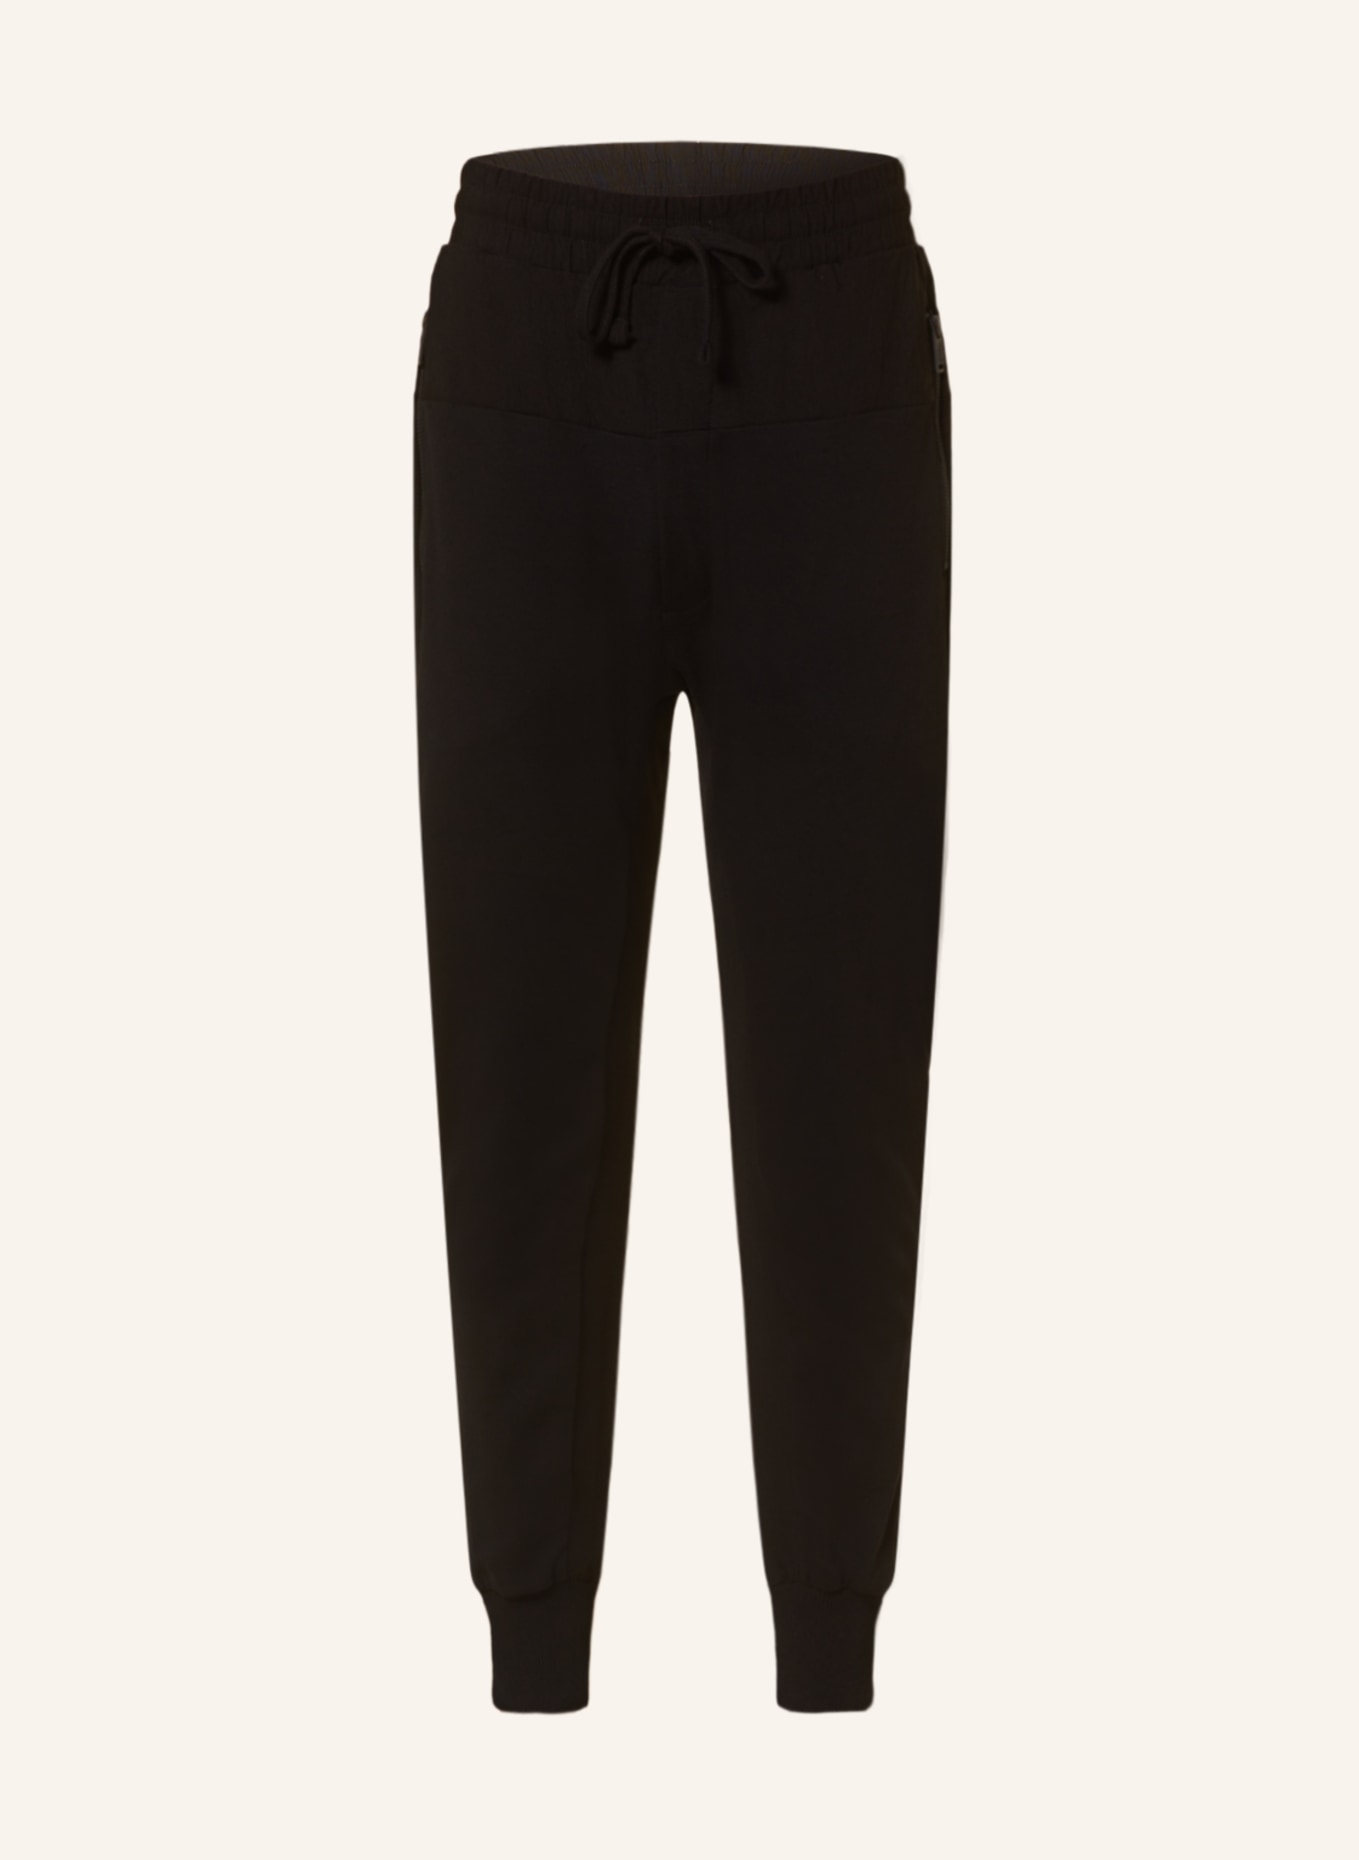 thom/krom Pants in jogger style extra slim fit, Color: BLACK (Image 1)